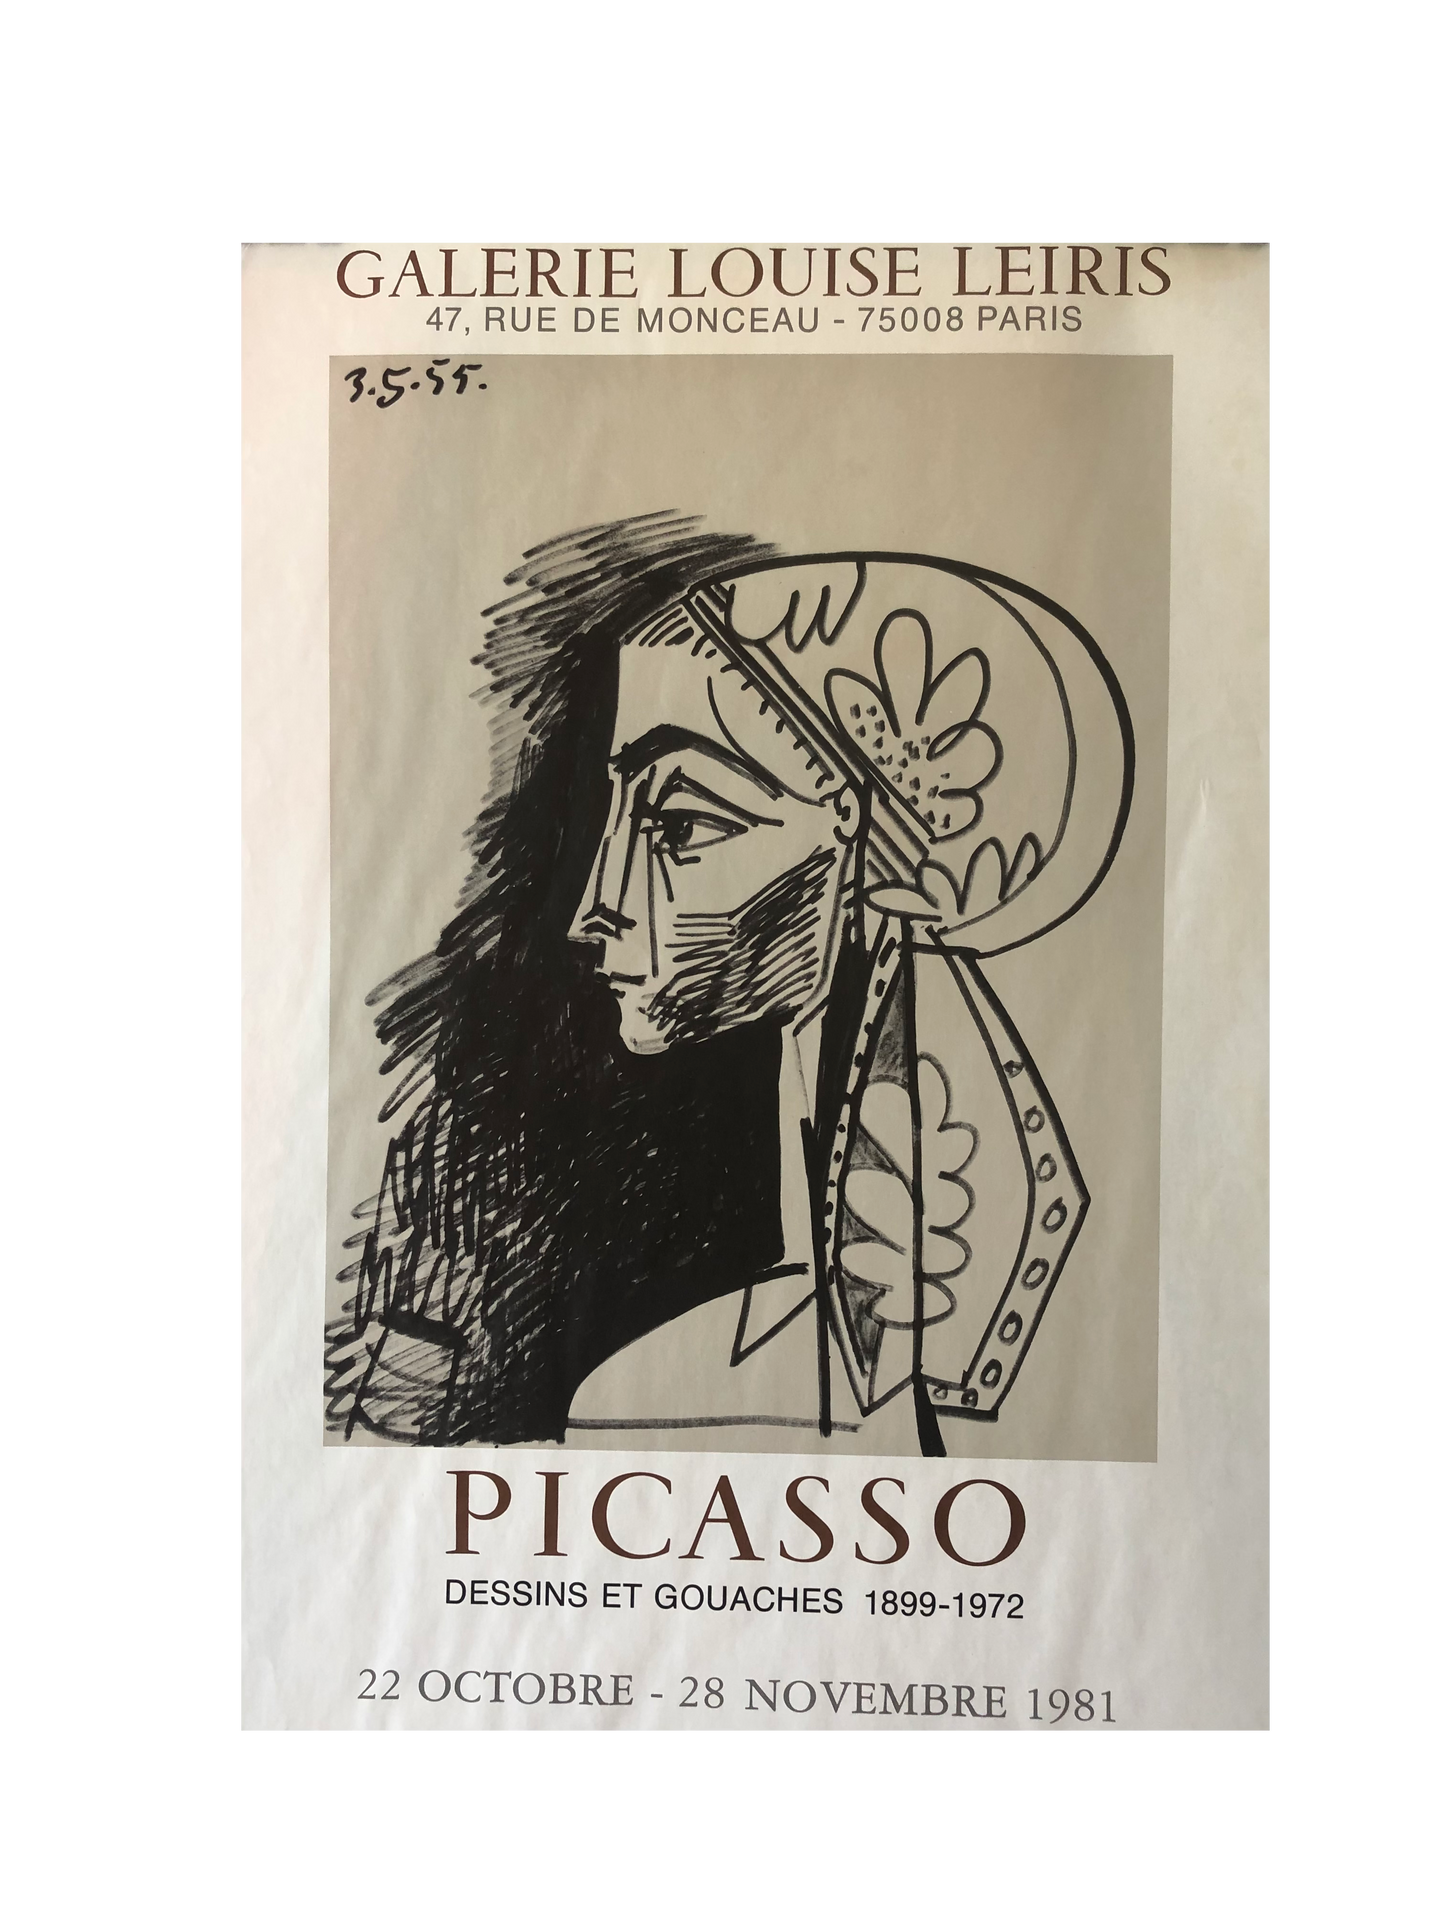 Picasso 'Designs and Guaches 1899-1972', Galerie Louise Leiris 1981